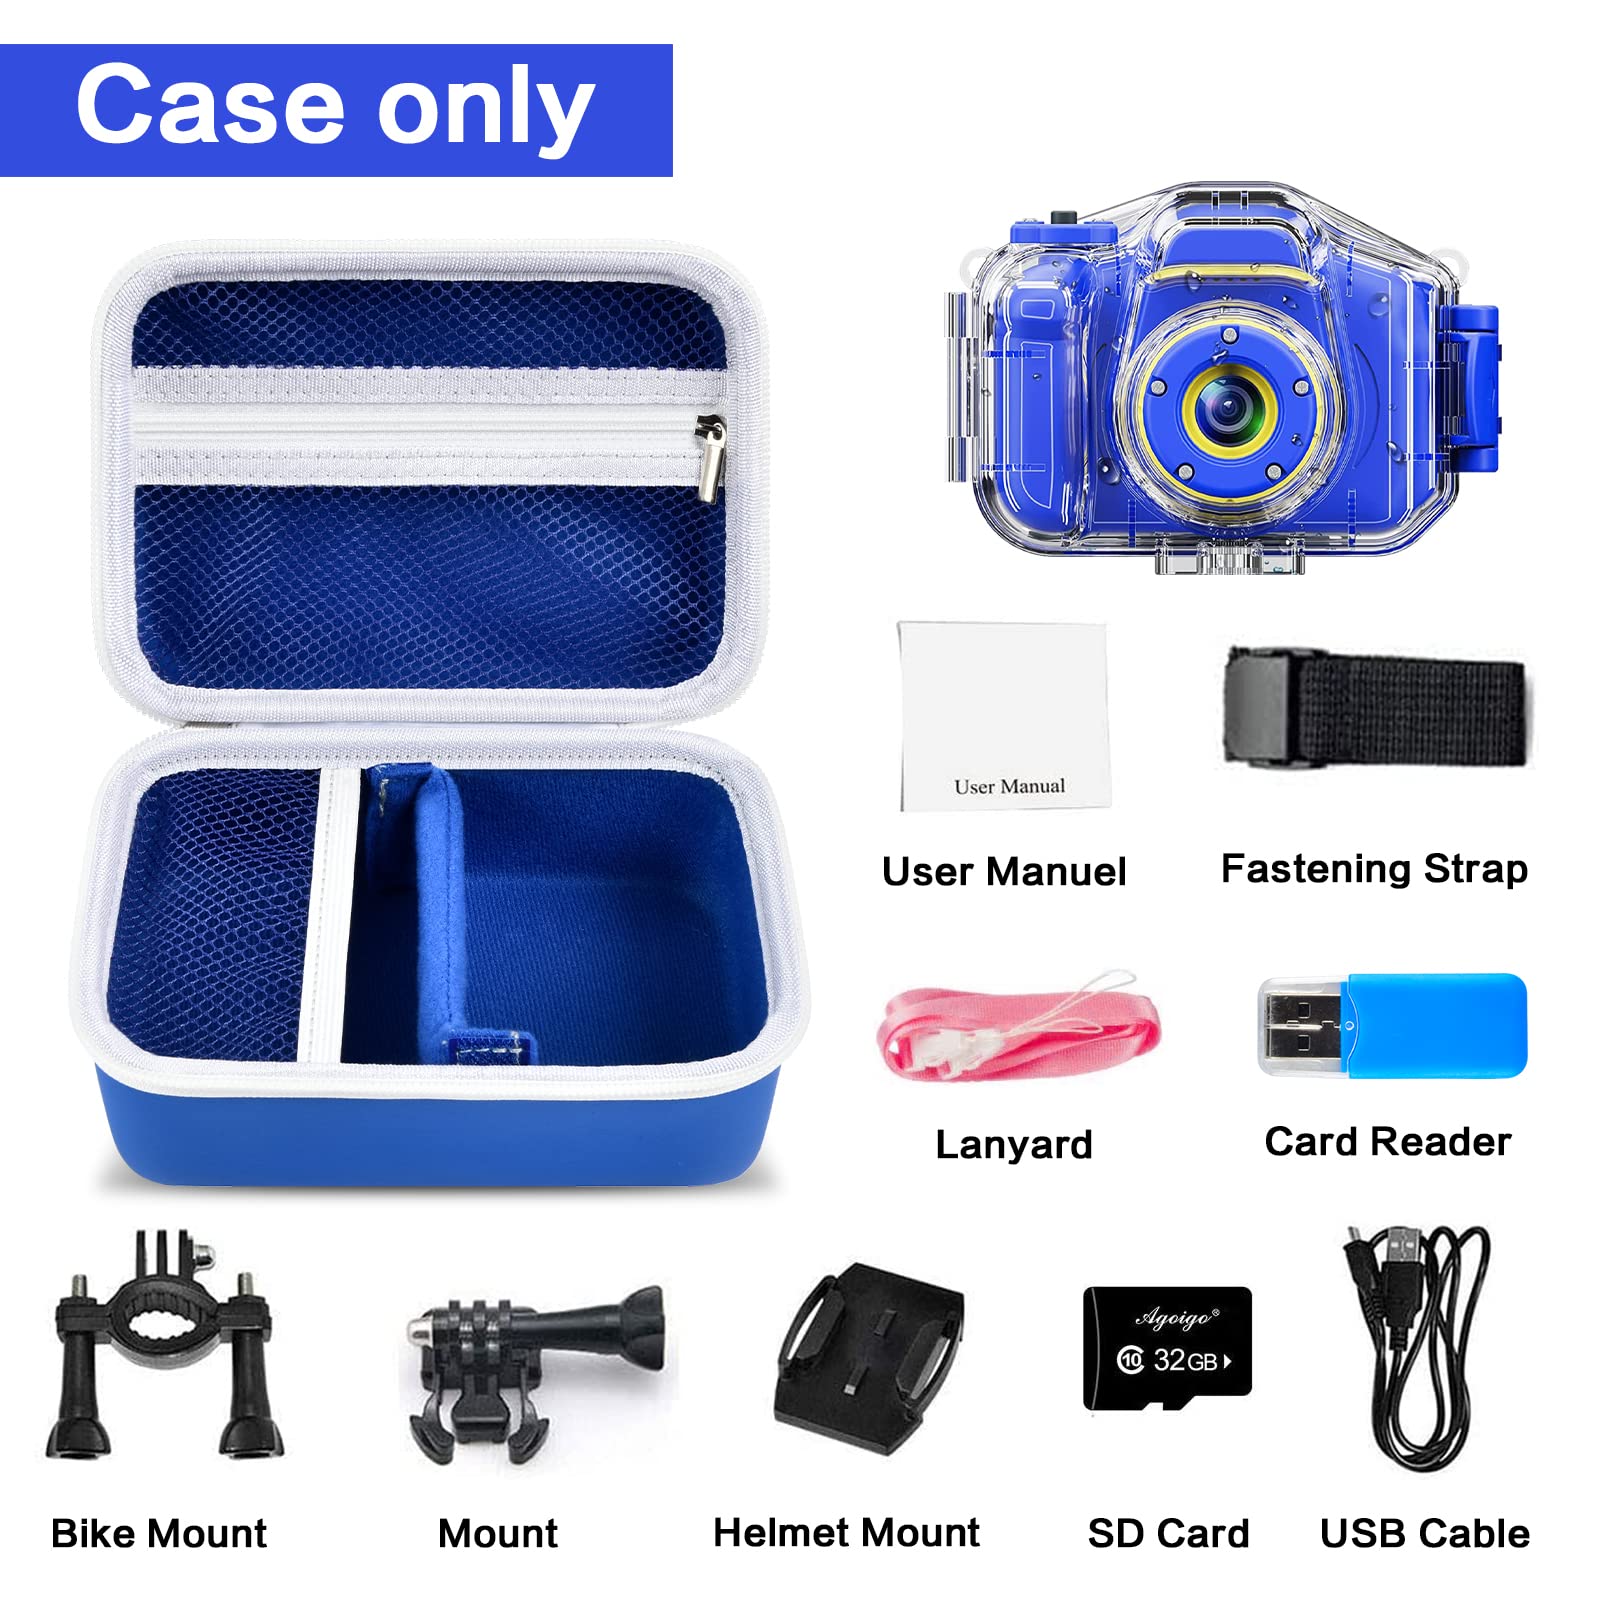 Againmore Kids Camera Case Compatible with Seckton/for Goopow/for Dylanto/for ESOXOFFORE/for Agoigo/for GKTZ Digital Waterproof Camera. Portable Instant Print Cameras Storage-Deep Blue